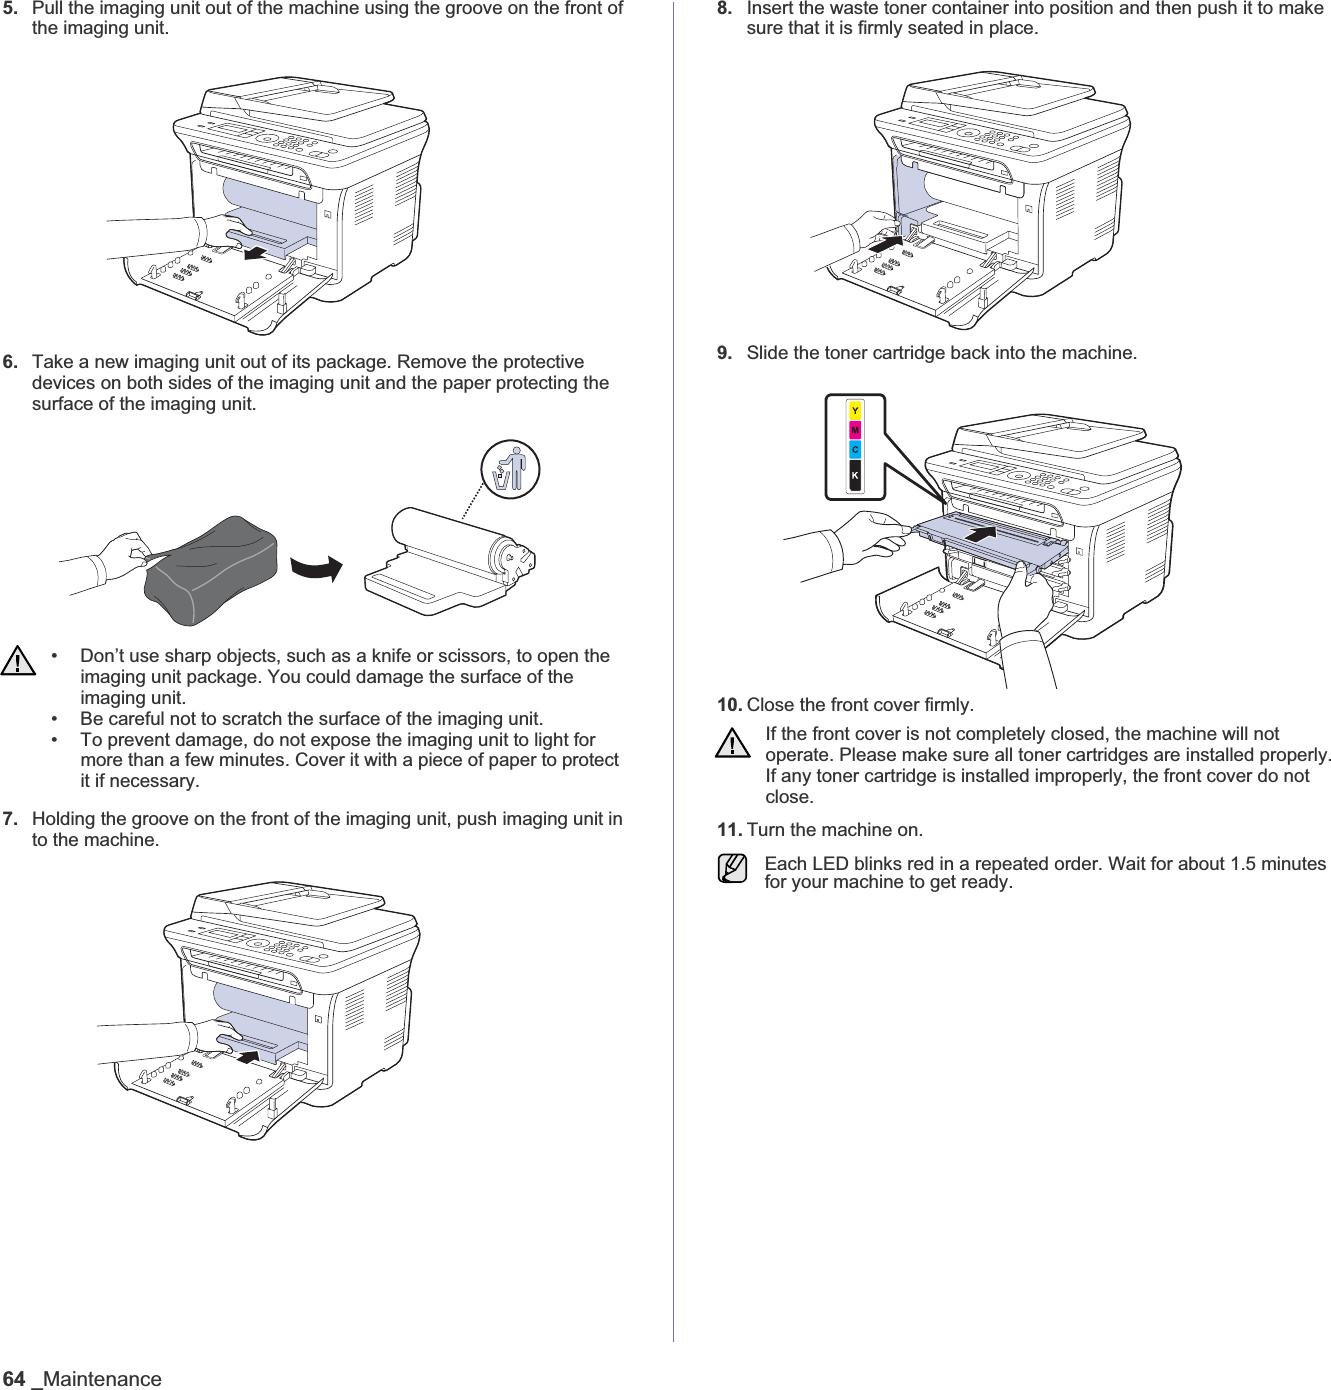 64 _Maintenance5. Pull the imaging unit out of the machine using the groove on the front of the imaging unit. 6. Take a new imaging unit out of its package. Remove the protective devices on both sides of the imaging unit and the paper protecting the surface of the imaging unit. 7. Holding the groove on the front of the imaging unit, push imaging unit in to the machine.8. Insert the waste toner container into position and then push it to make sure that it is firmly seated in place.9. Slide the toner cartridge back into the machine.10. Close the front cover firmly. 11. Turn the machine on.• Don’t use sharp objects, such as a knife or scissors, to open the imaging unit package. You could damage the surface of the imaging unit.• Be careful not to scratch the surface of the imaging unit.• To prevent damage, do not expose the imaging unit to light for more than a few minutes. Cover it with a piece of paper to protect it if necessary.If the front cover is not completely closed, the machine will not operate. Please make sure all toner cartridges are installed properly. If any toner cartridge is installed improperly, the front cover do not close.Each LED blinks red in a repeated order. Wait for about 1.5 minutes for your machine to get ready.